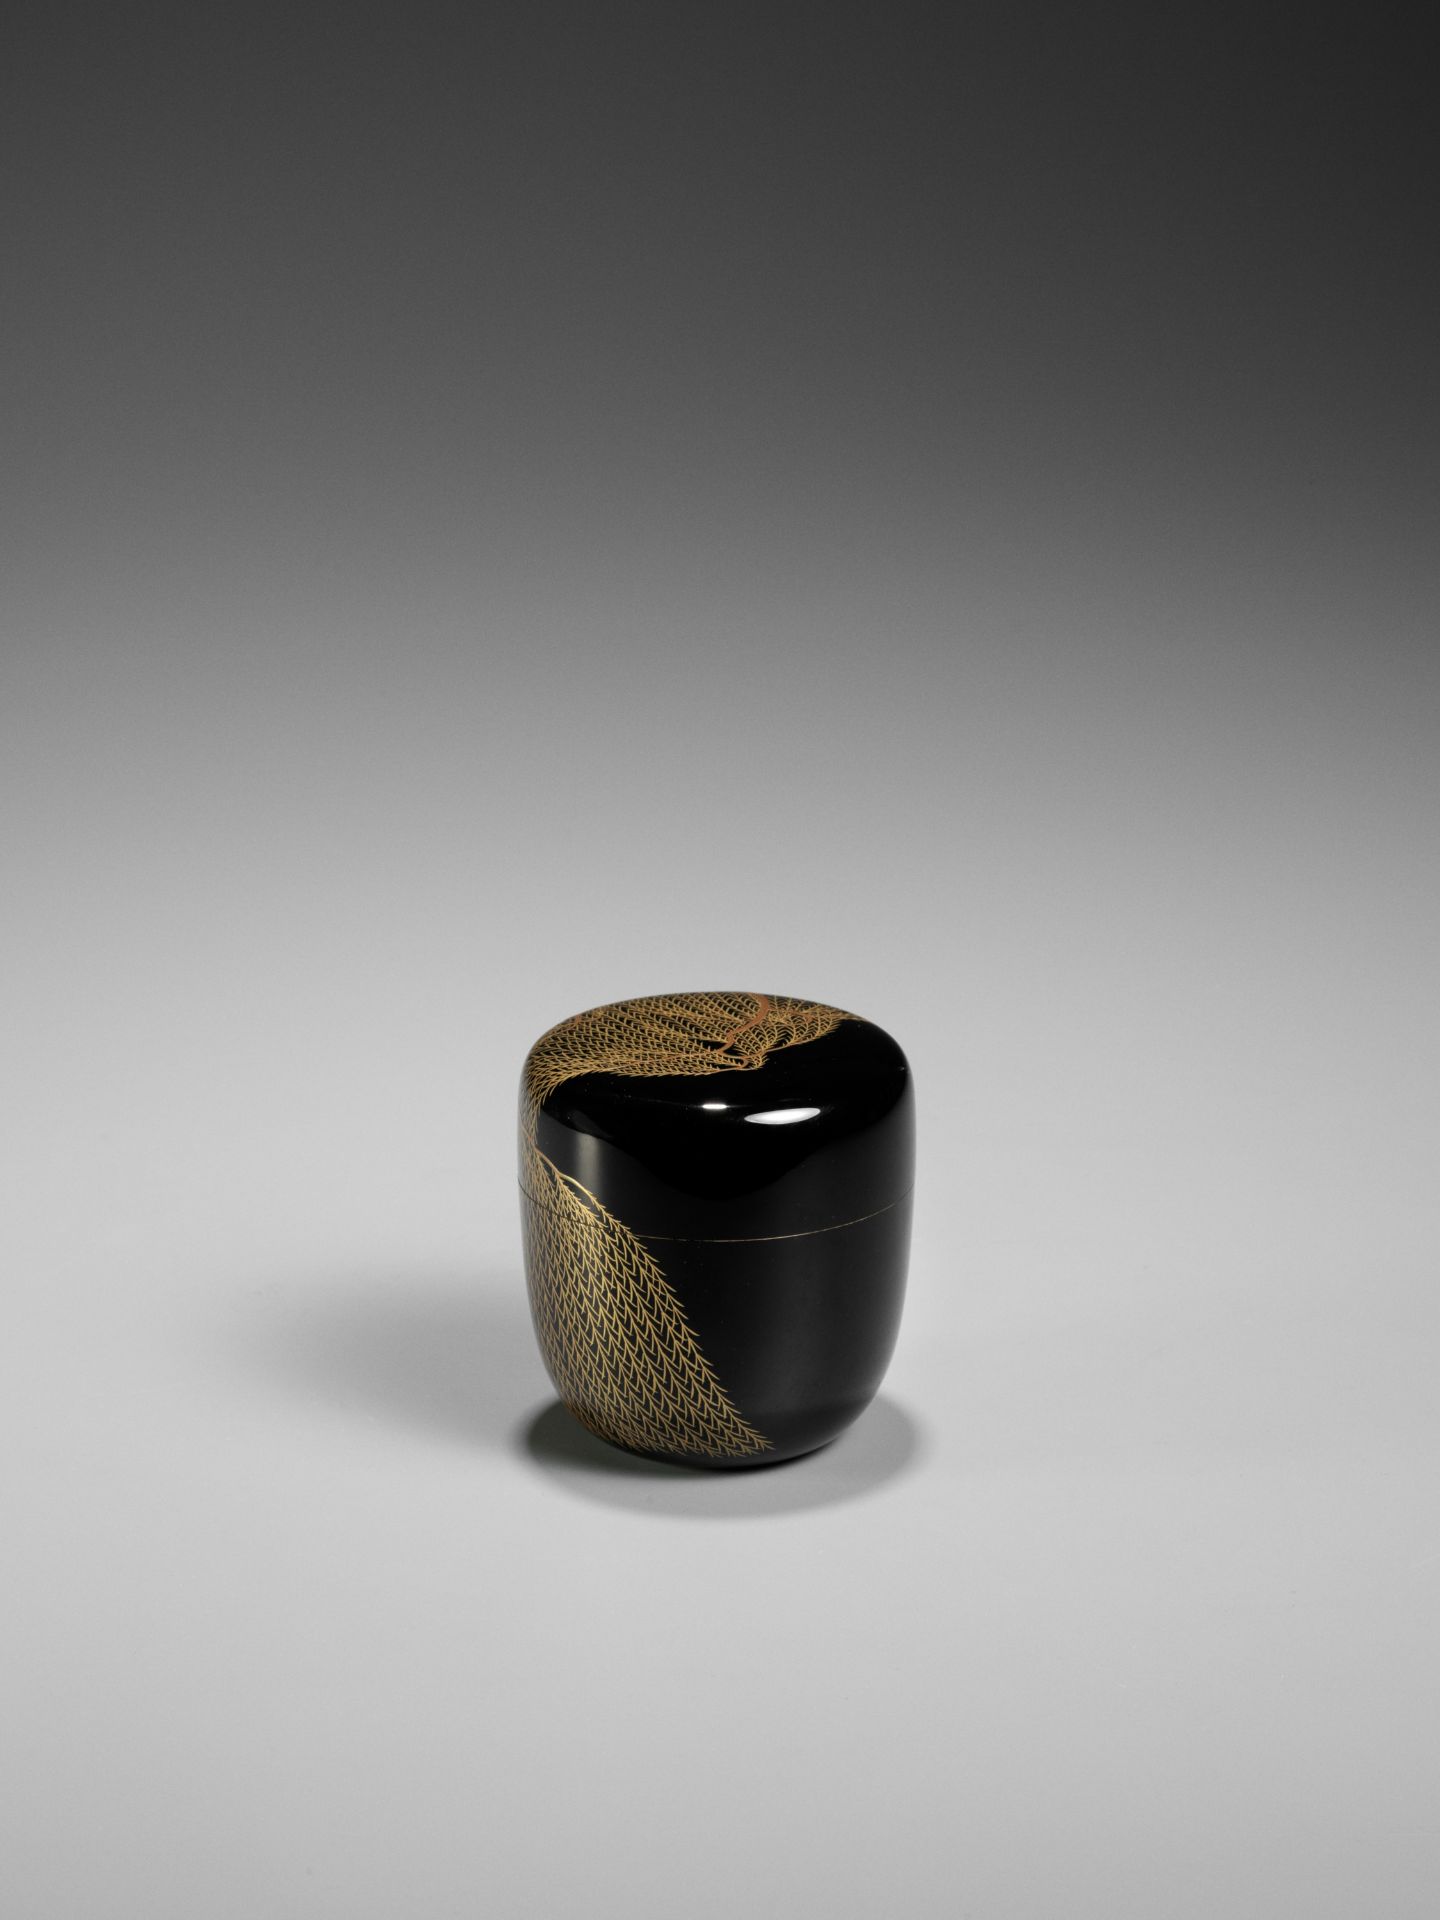 A BLACK AND GOLD LACQUER NATSUME (TEA CADDY) WITH A WEEPING WILLOW (YANAGI) - Image 6 of 9